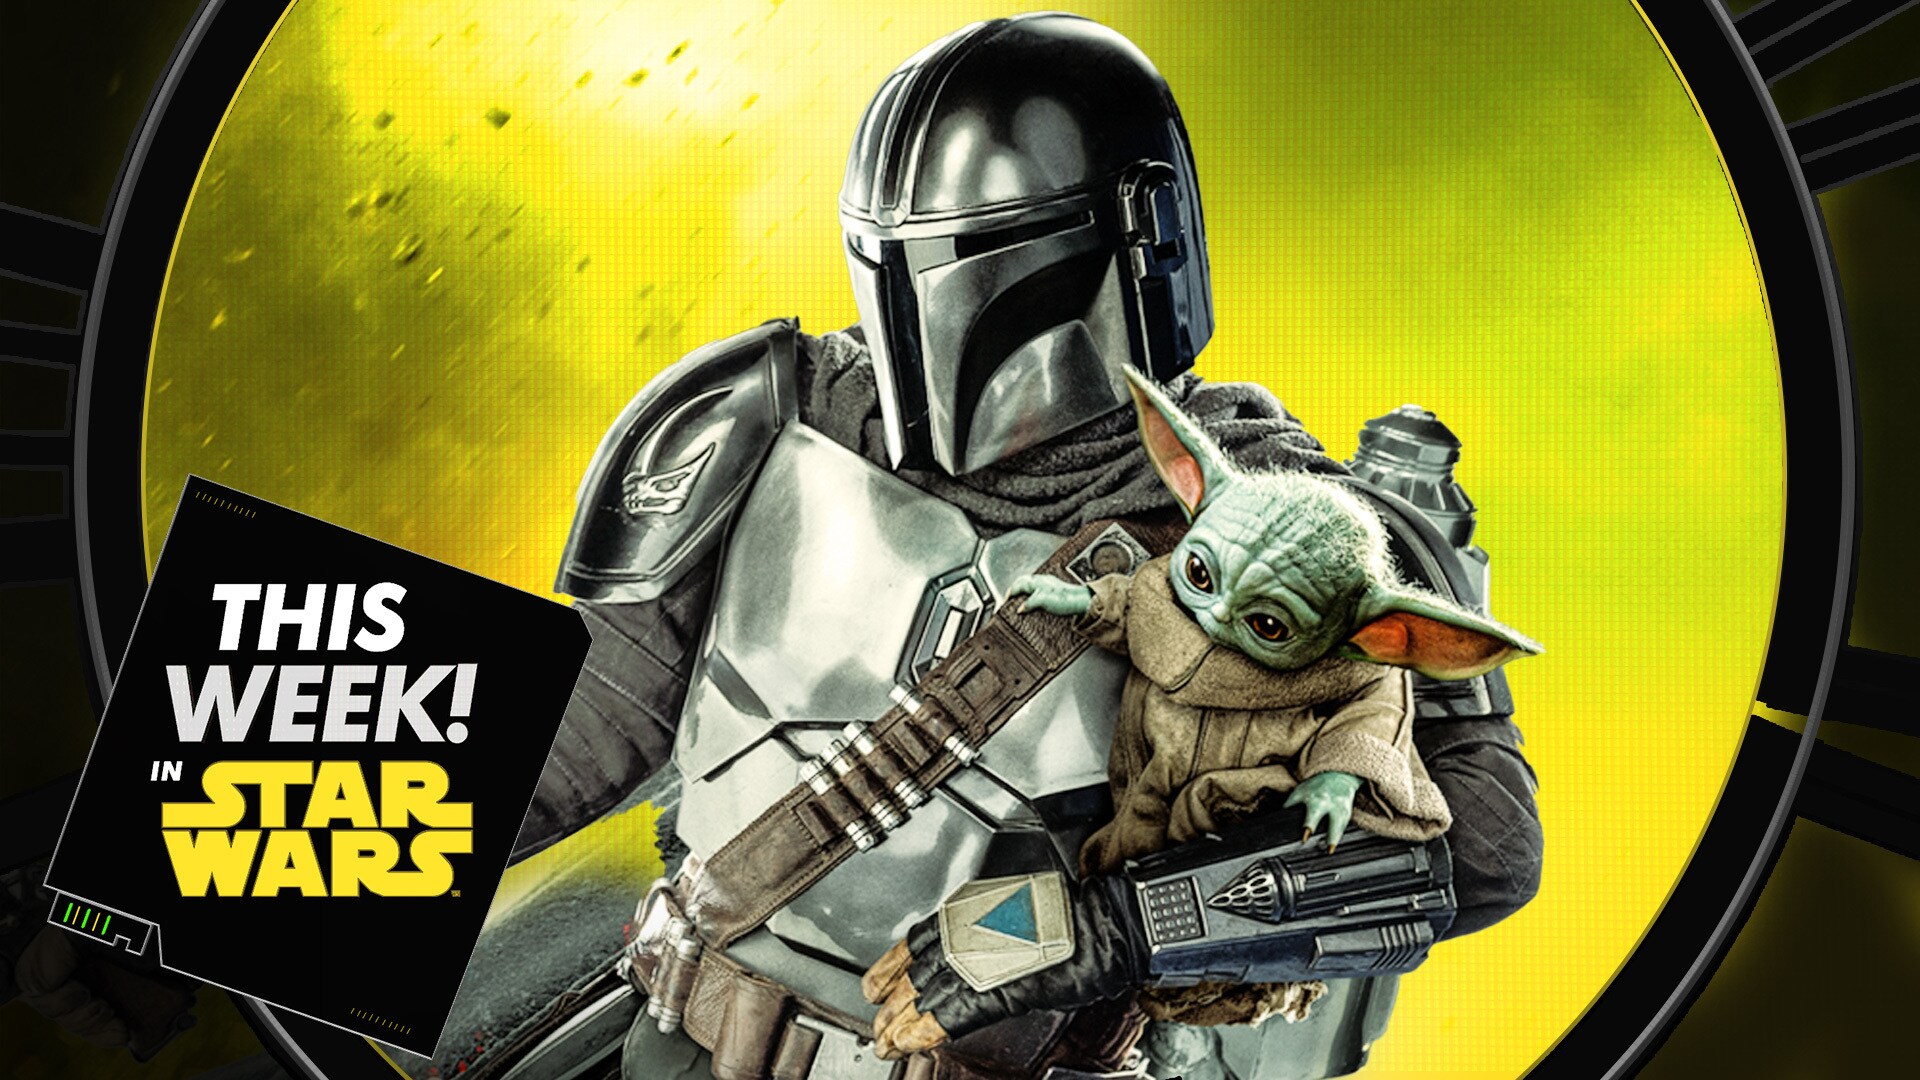 Mandalorian Season 3 Trailer, Riot Racing with The Bad Batch, and More!